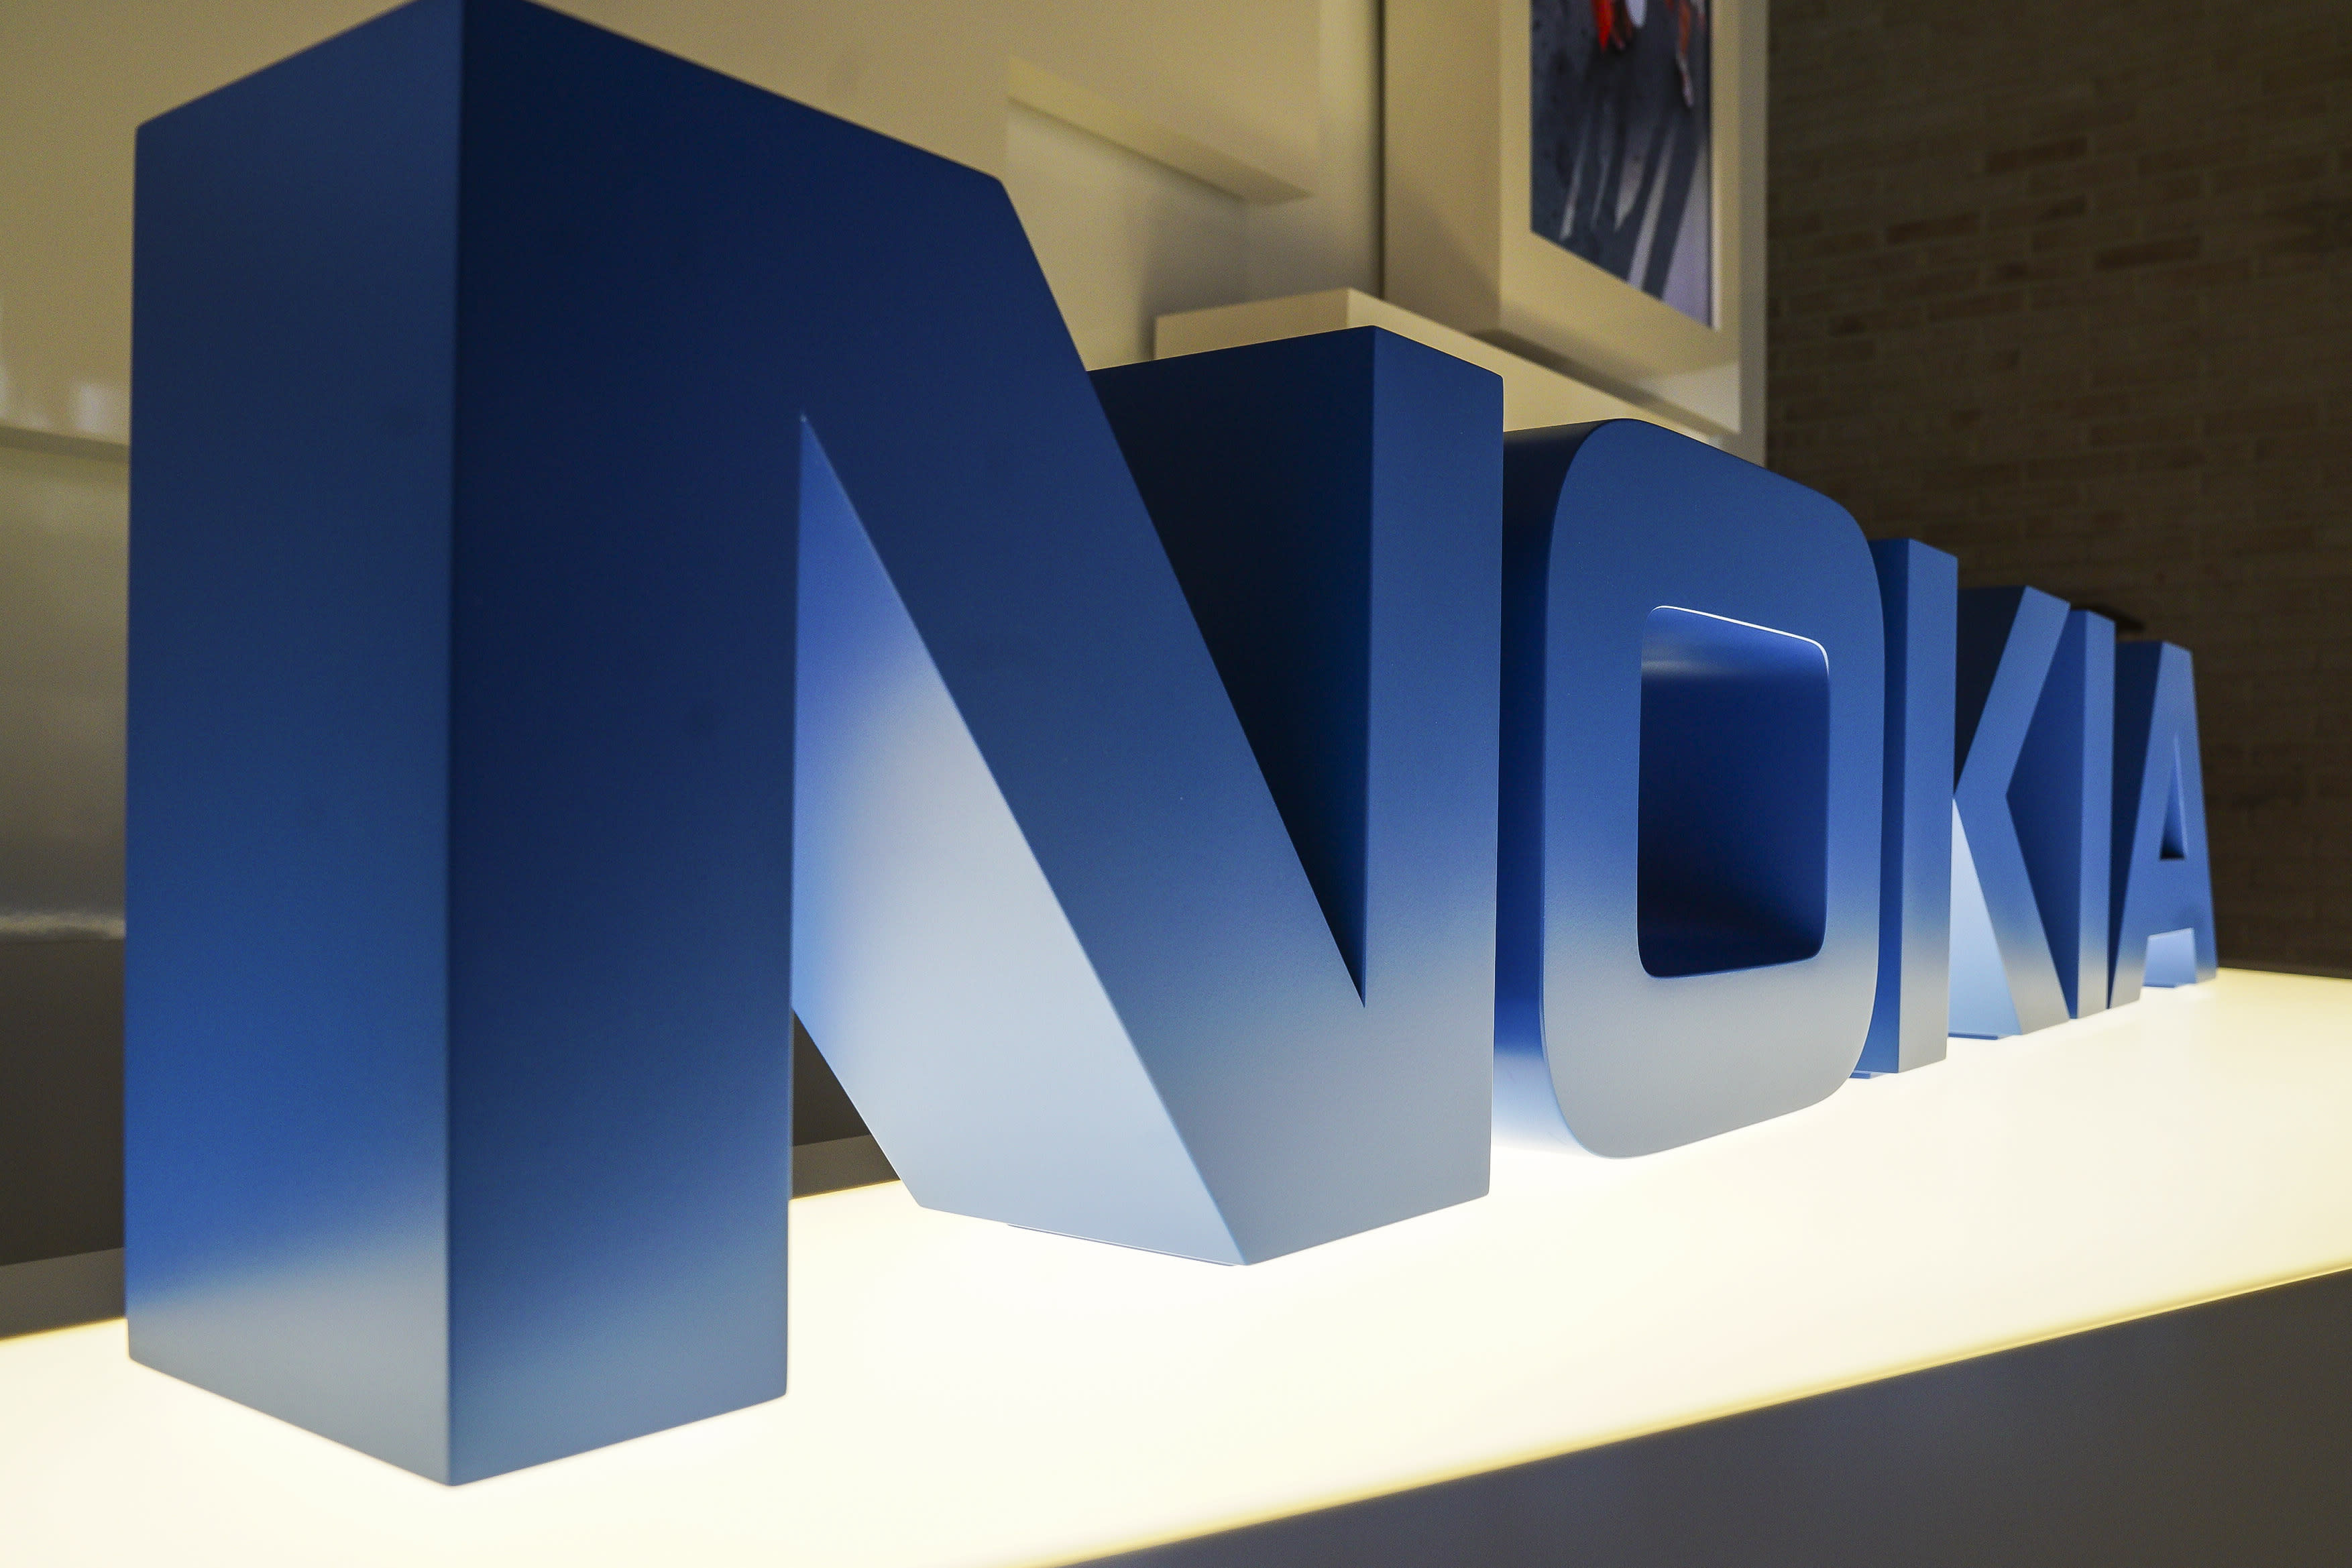 Nokia’s 2019 profit warning followed the rules, authorities investigated